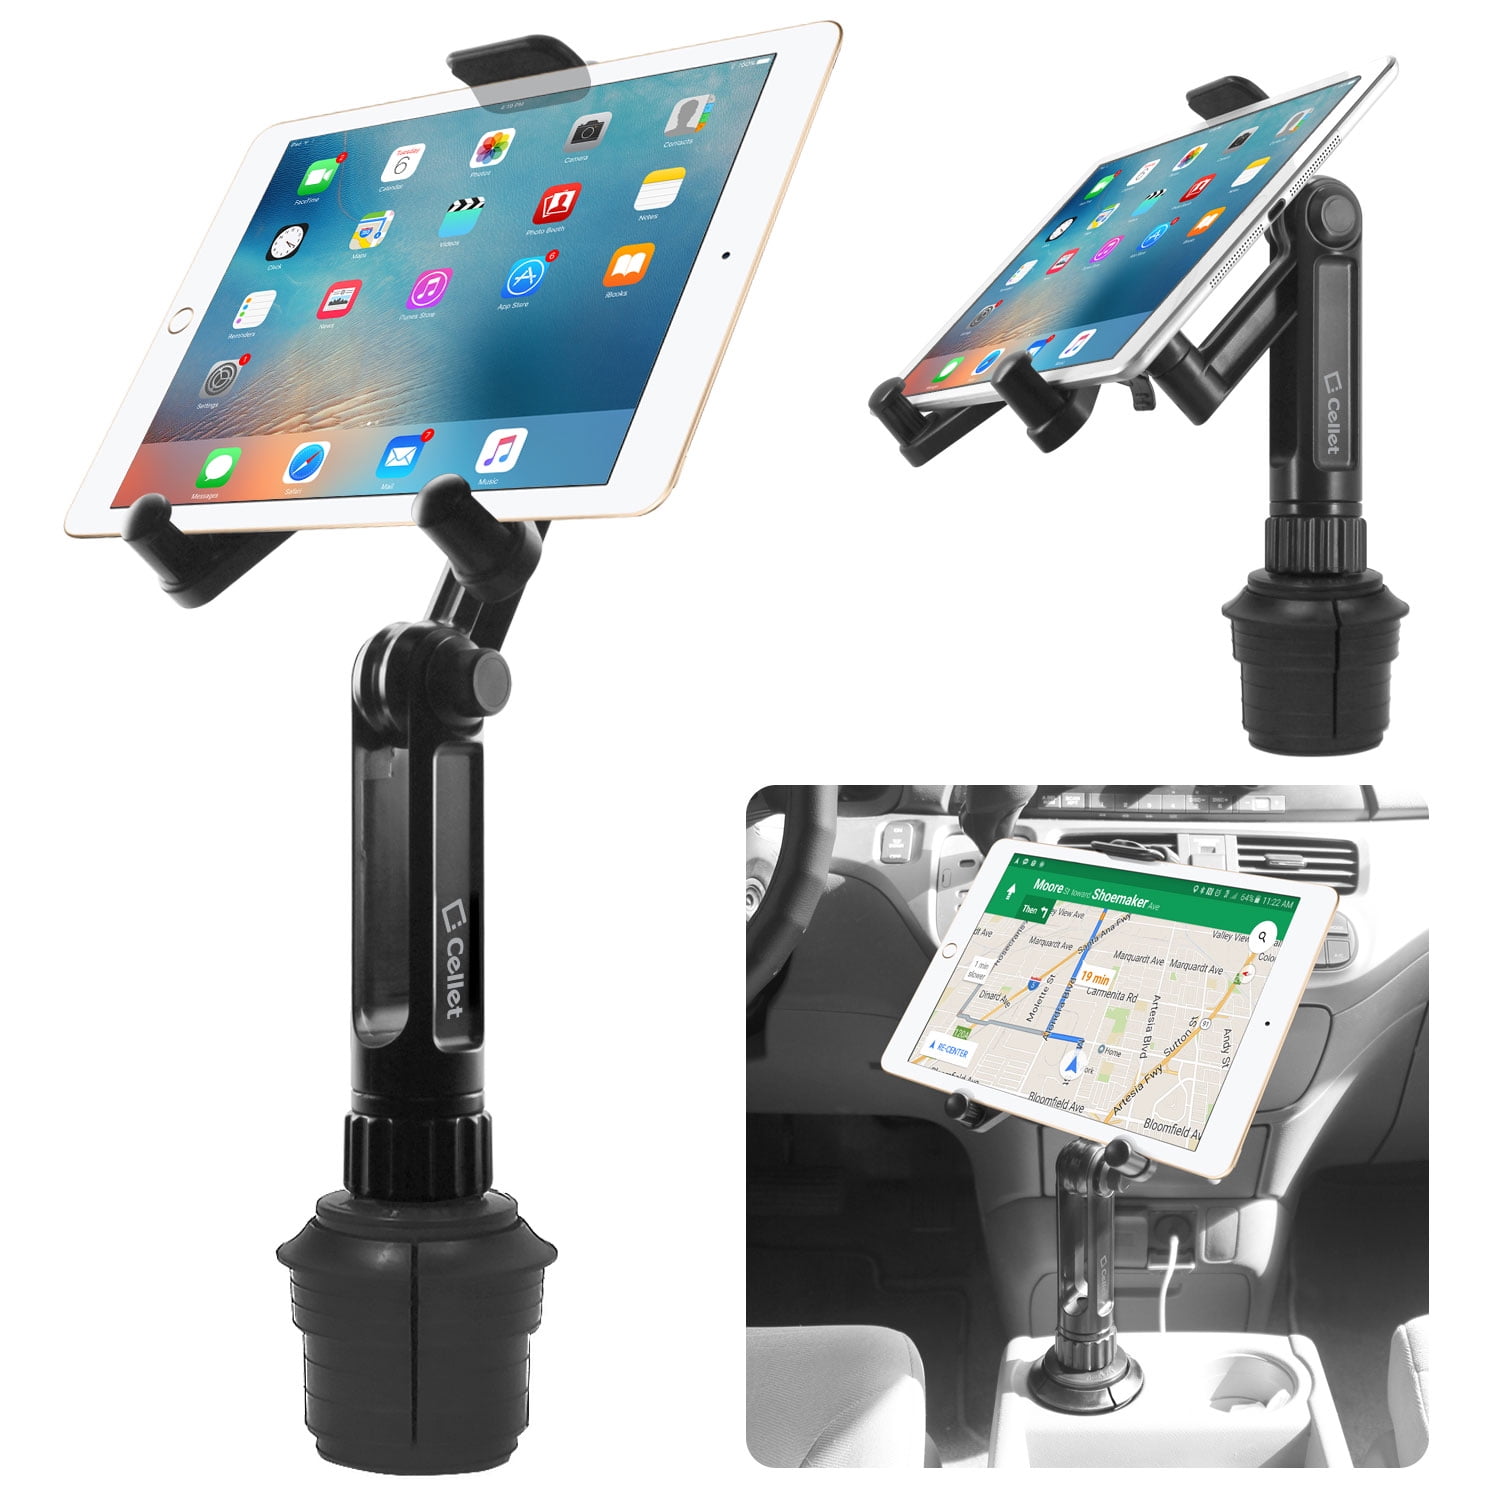 APPS2Car Cup Holder Tablet Mount iPhone 2-in-1 Cup Holder Car Cradle Adjustable Tablet Car Mount Holder for Car/Truck Compatible with 4.3-11 inch Tablets Apple iPad Mini/Air/Pro All Smartphones 